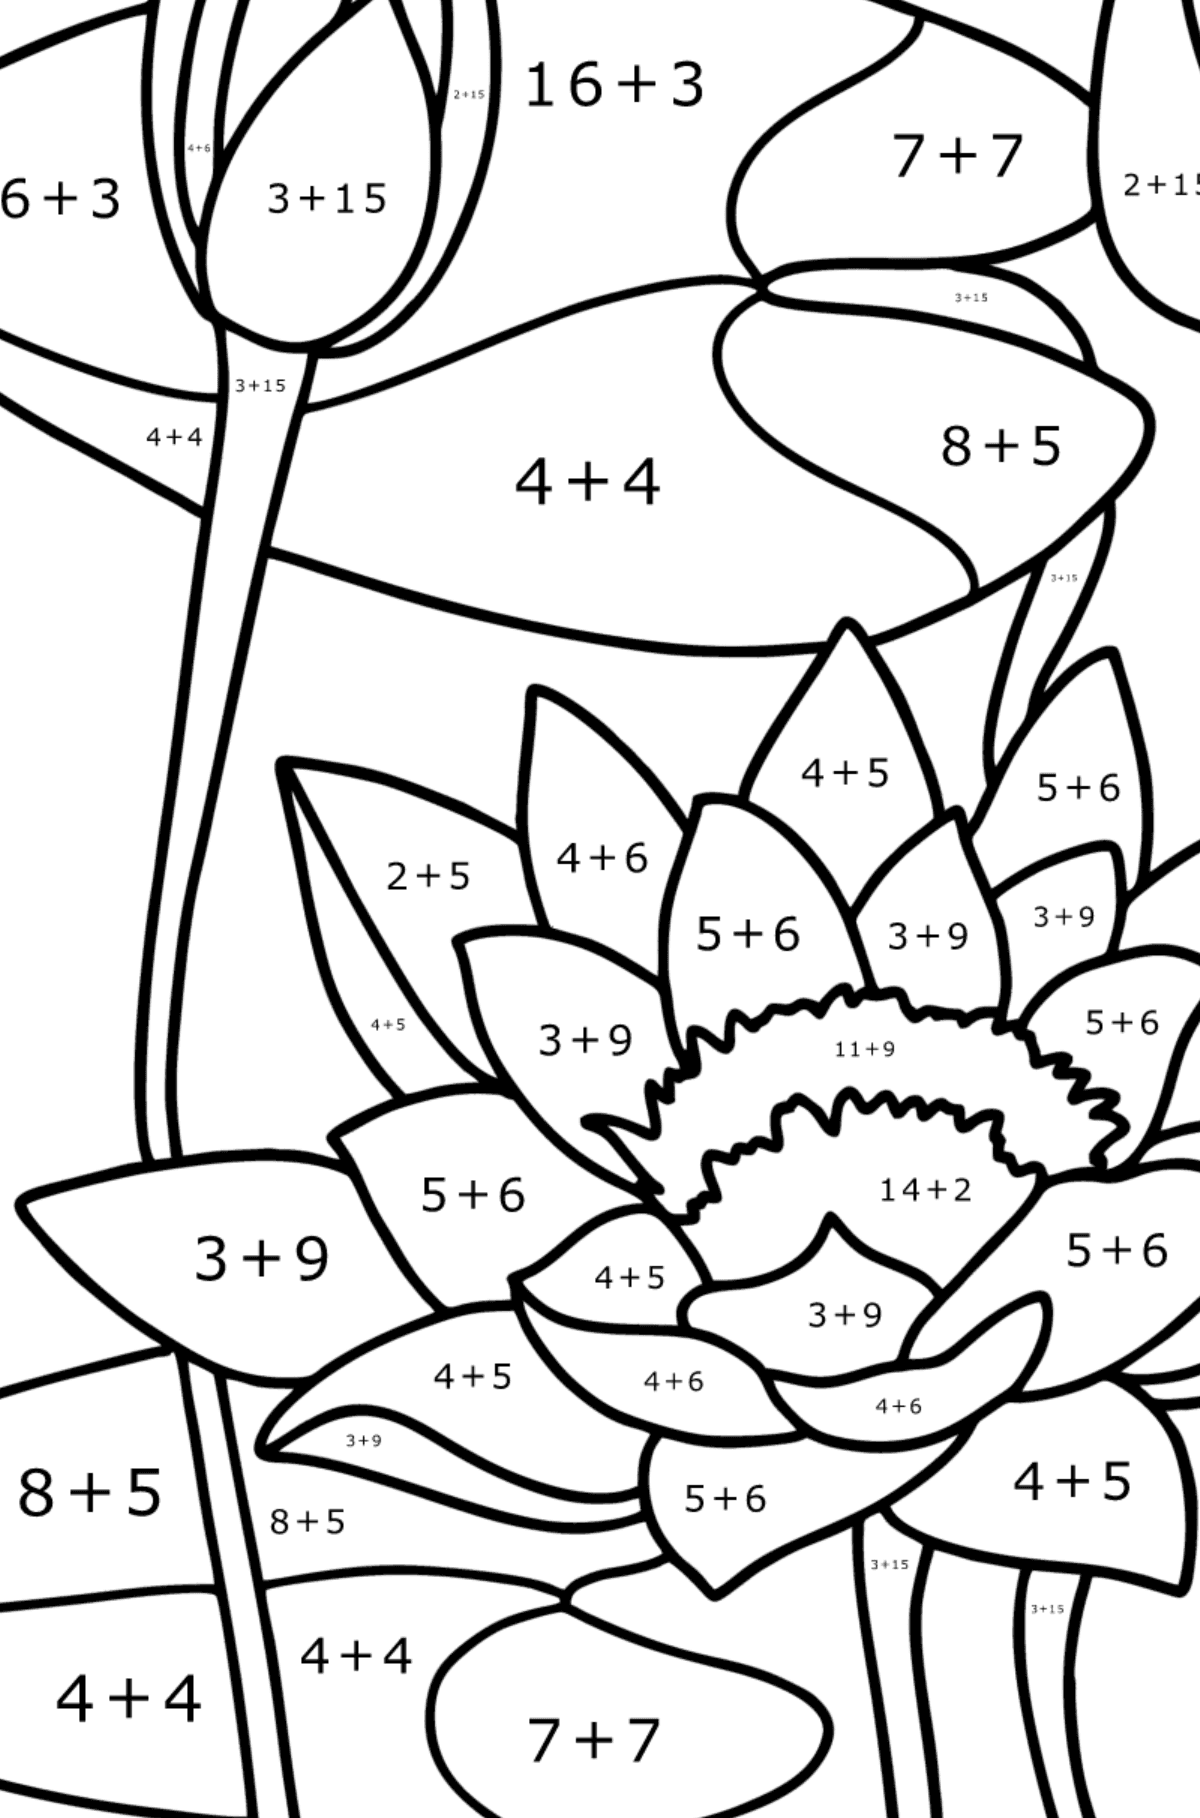 Water lily coloring page - Math Coloring - Addition for Kids